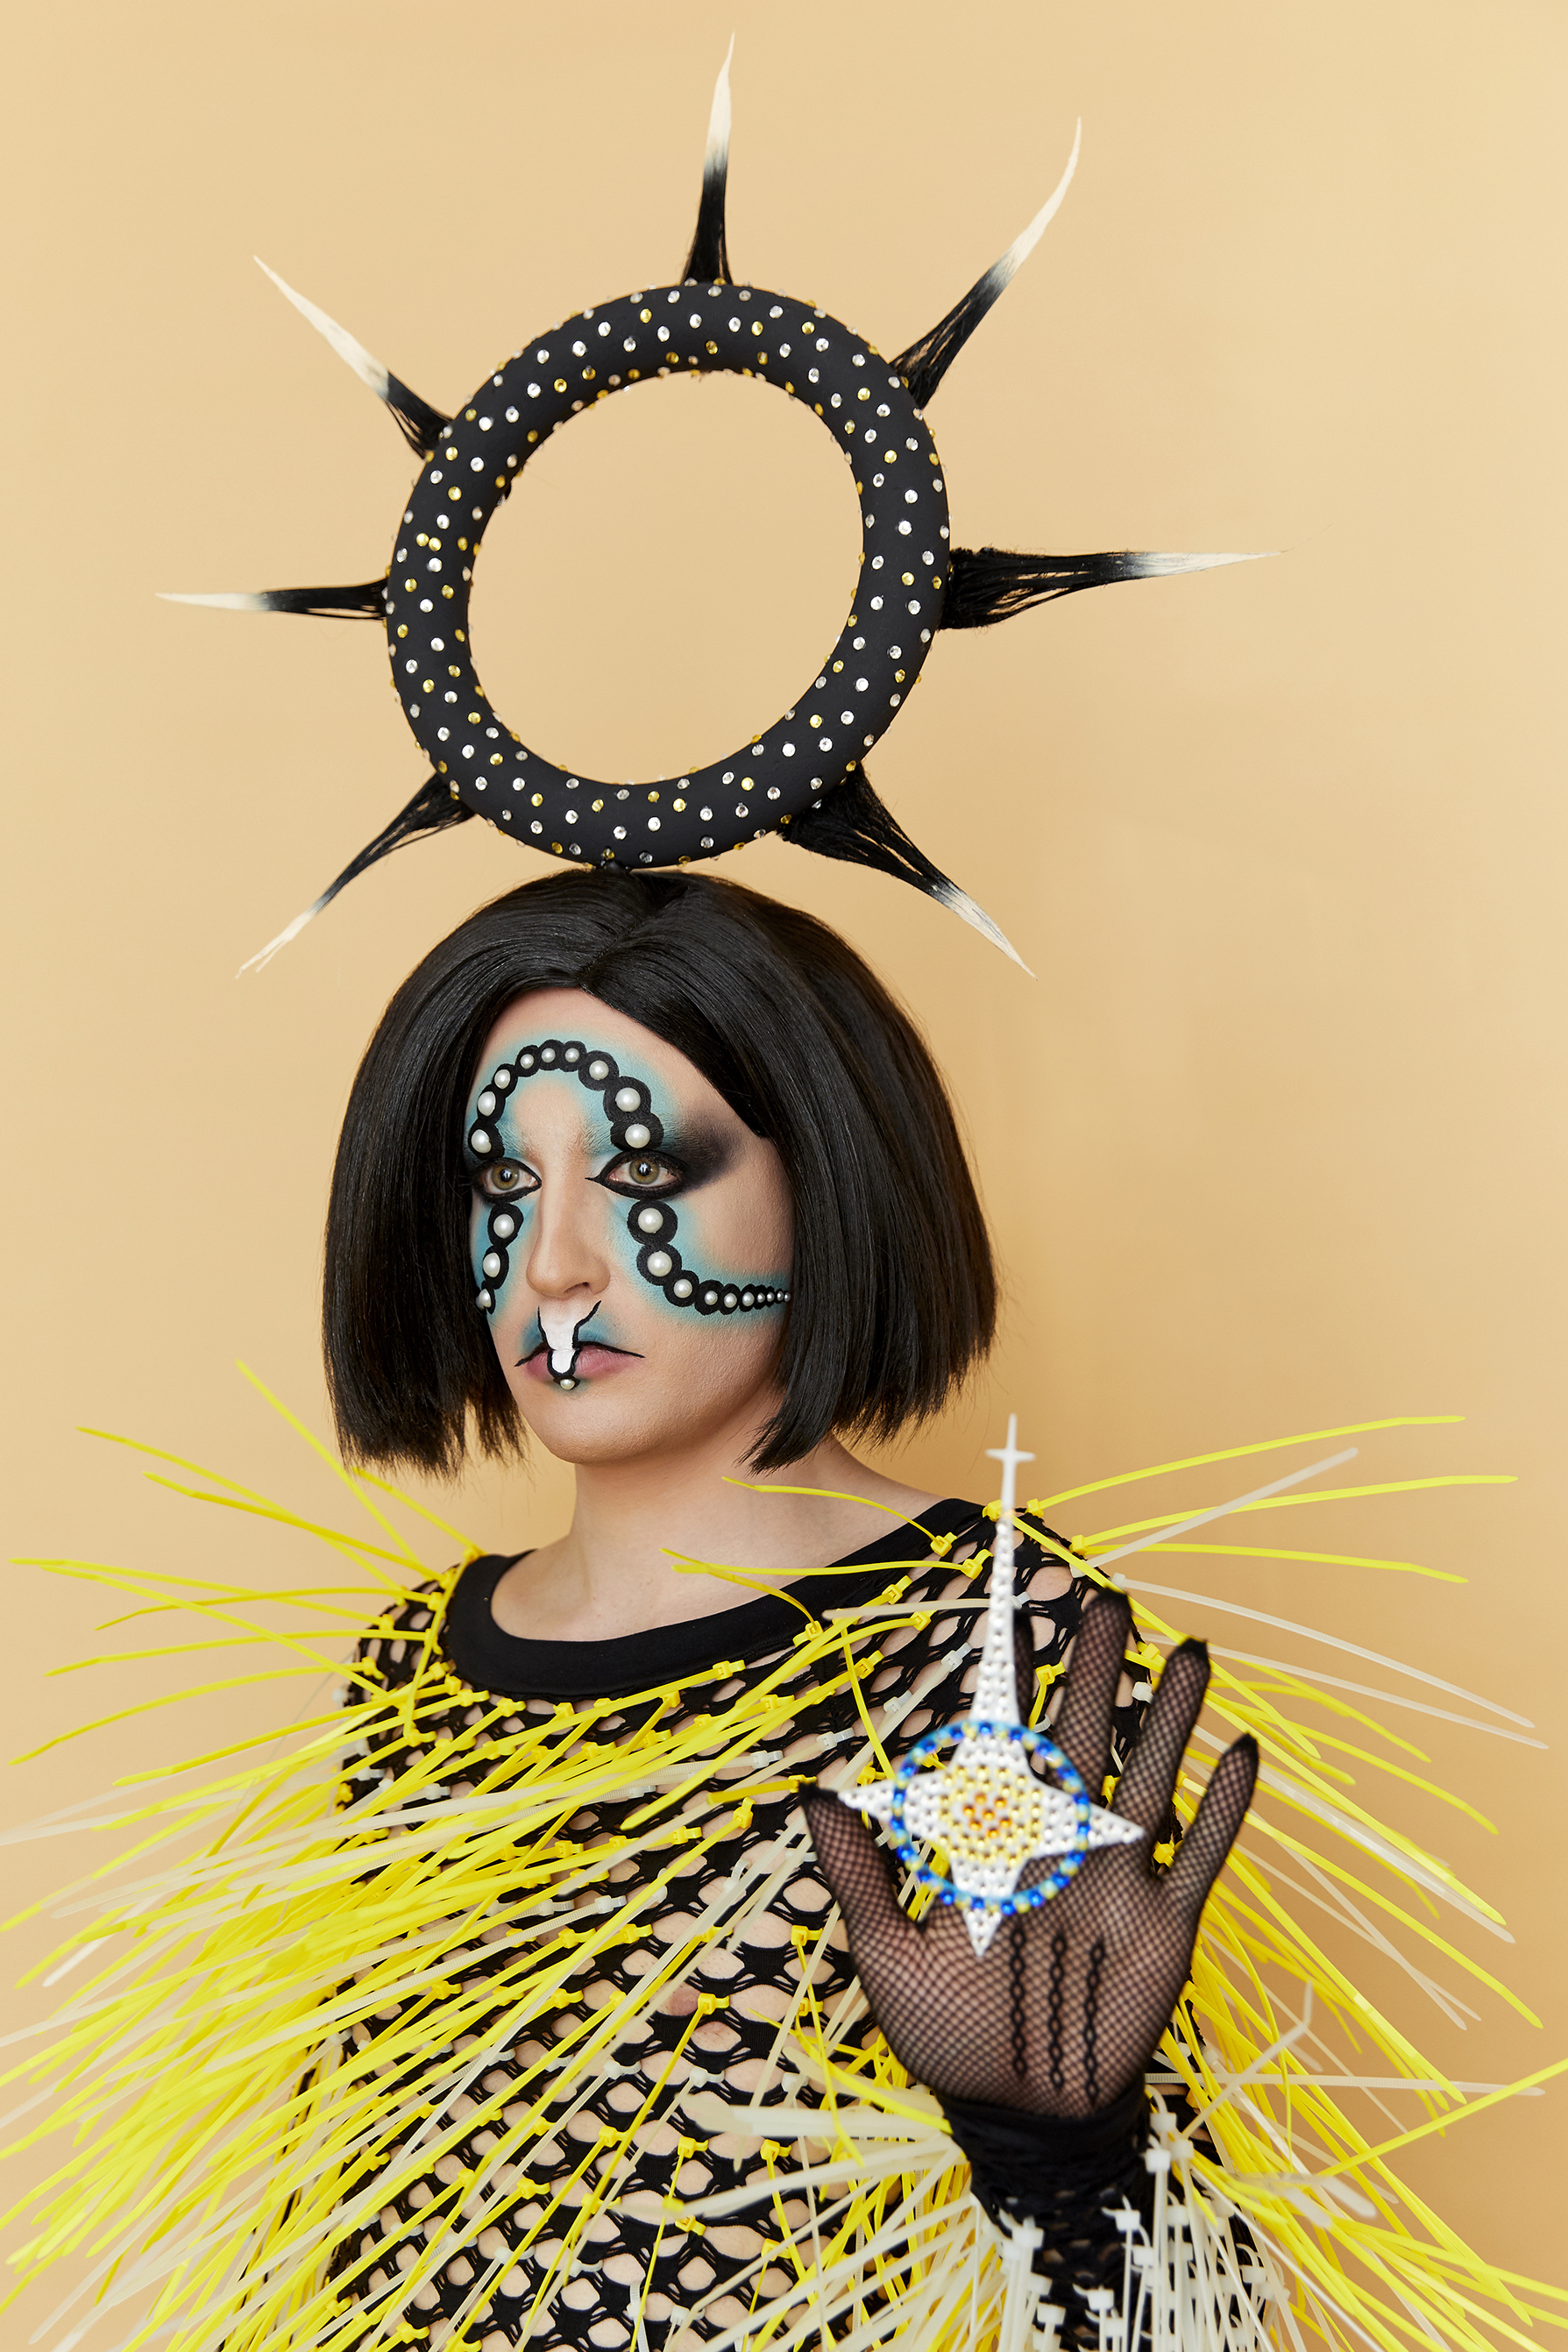 Jesse facing away from the camera wearing a graphic makeup look with an ornate headpiece and black fishnet top covered in yellow and white spikes against a tan background